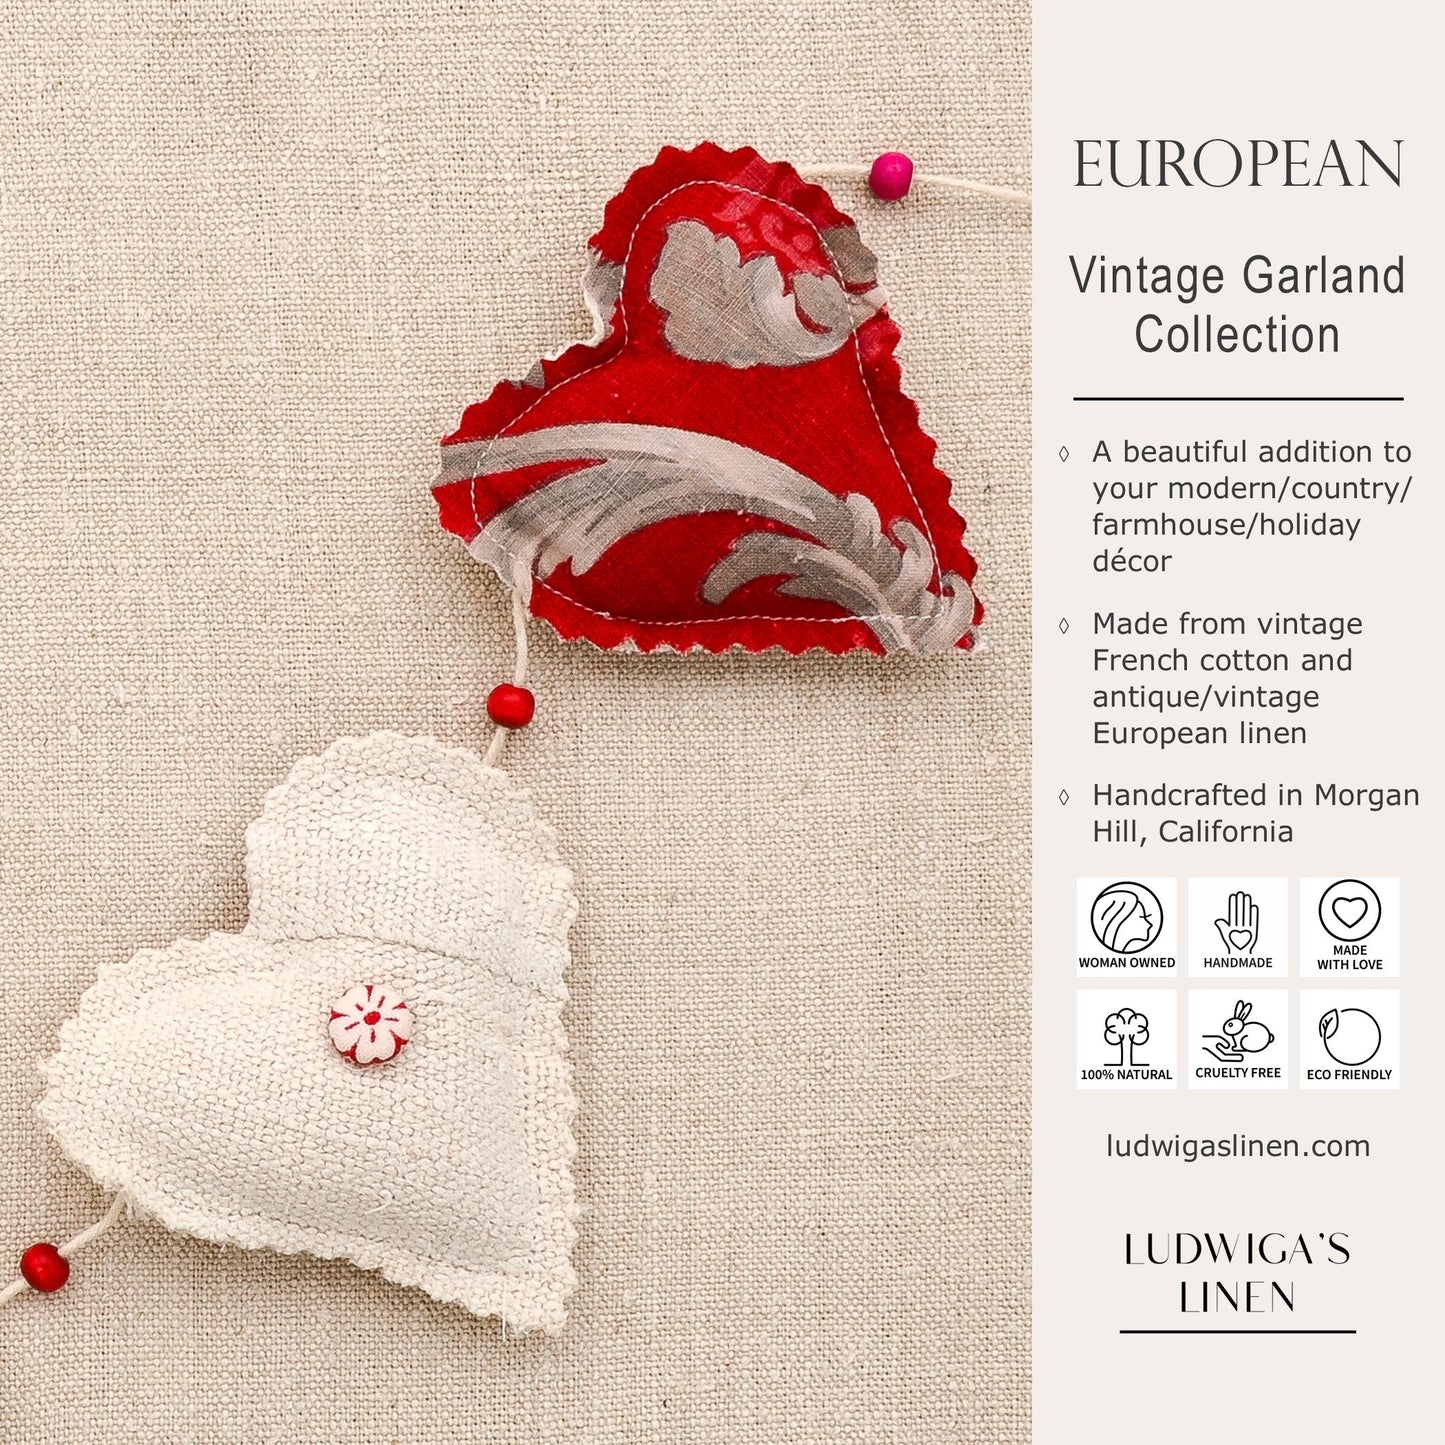 Focus on two hearts in this vintage French fabric garland, white cotton twine and wooden beads between hearts